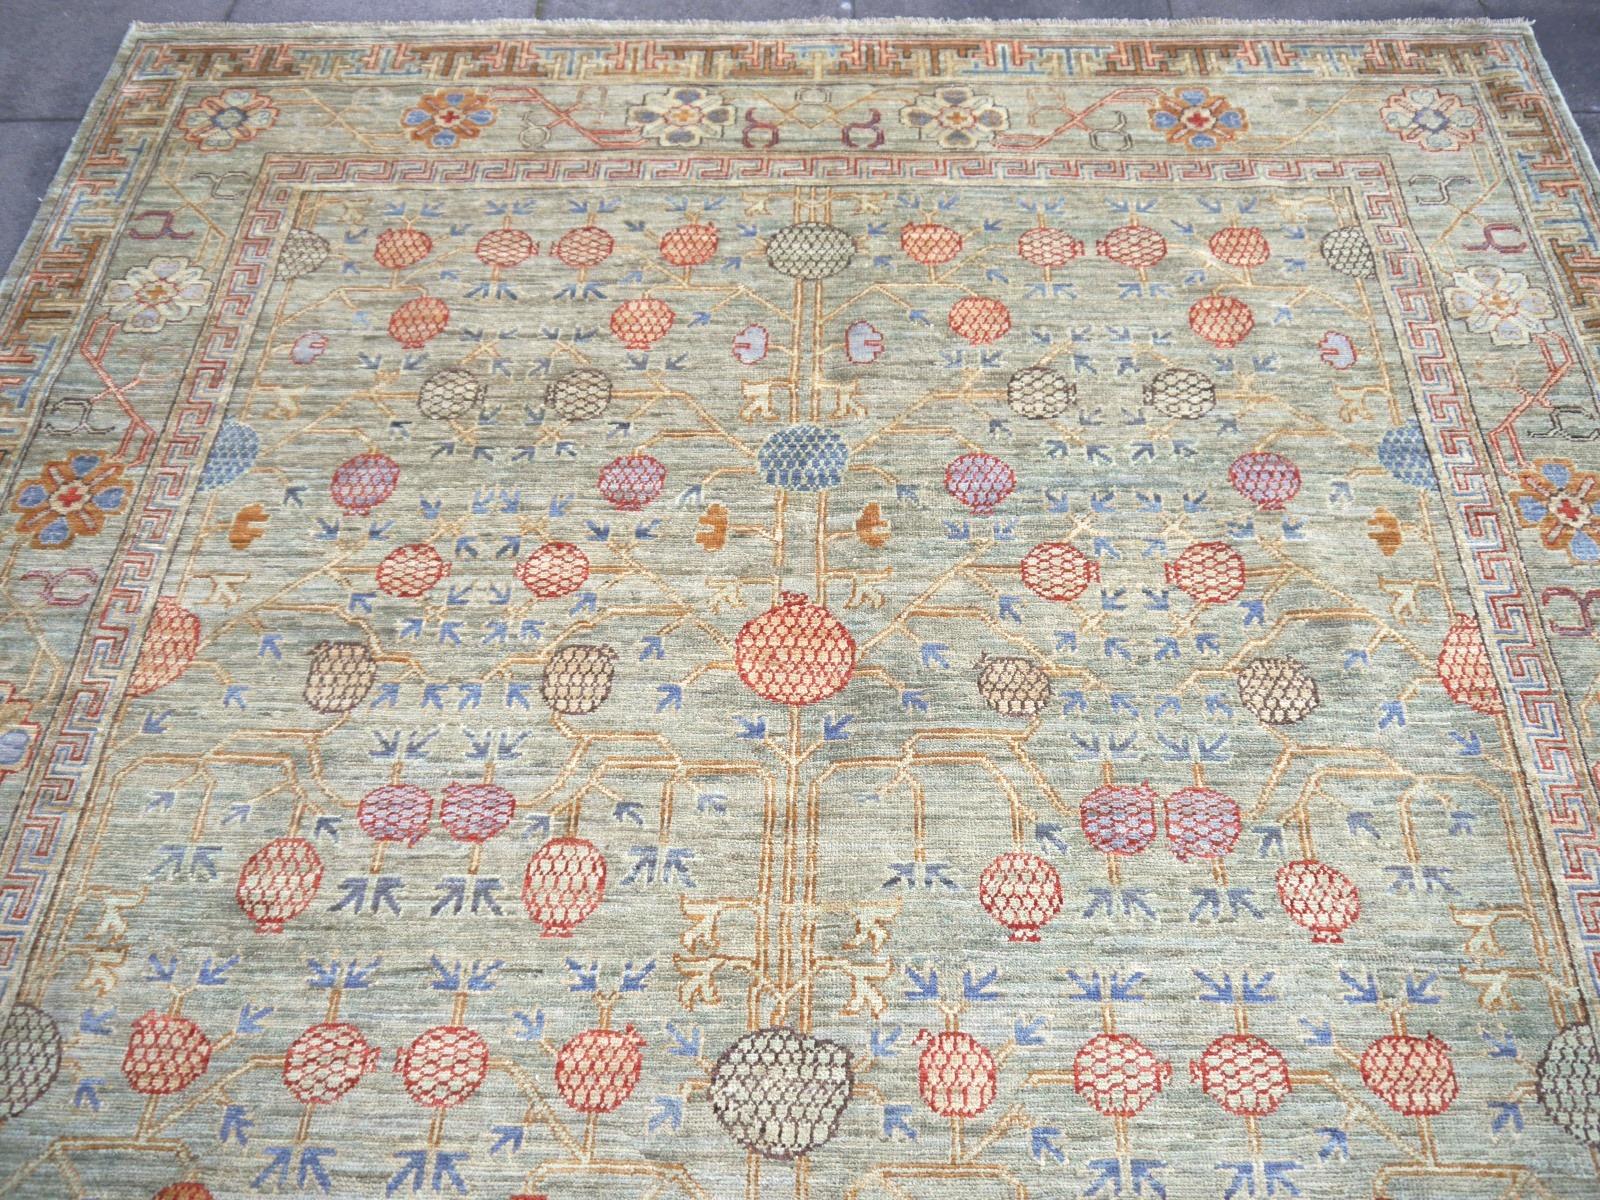 Khotan Style Rug Hand Knotted Pomegranate Tree Contemporary Wool Area Carpet 1